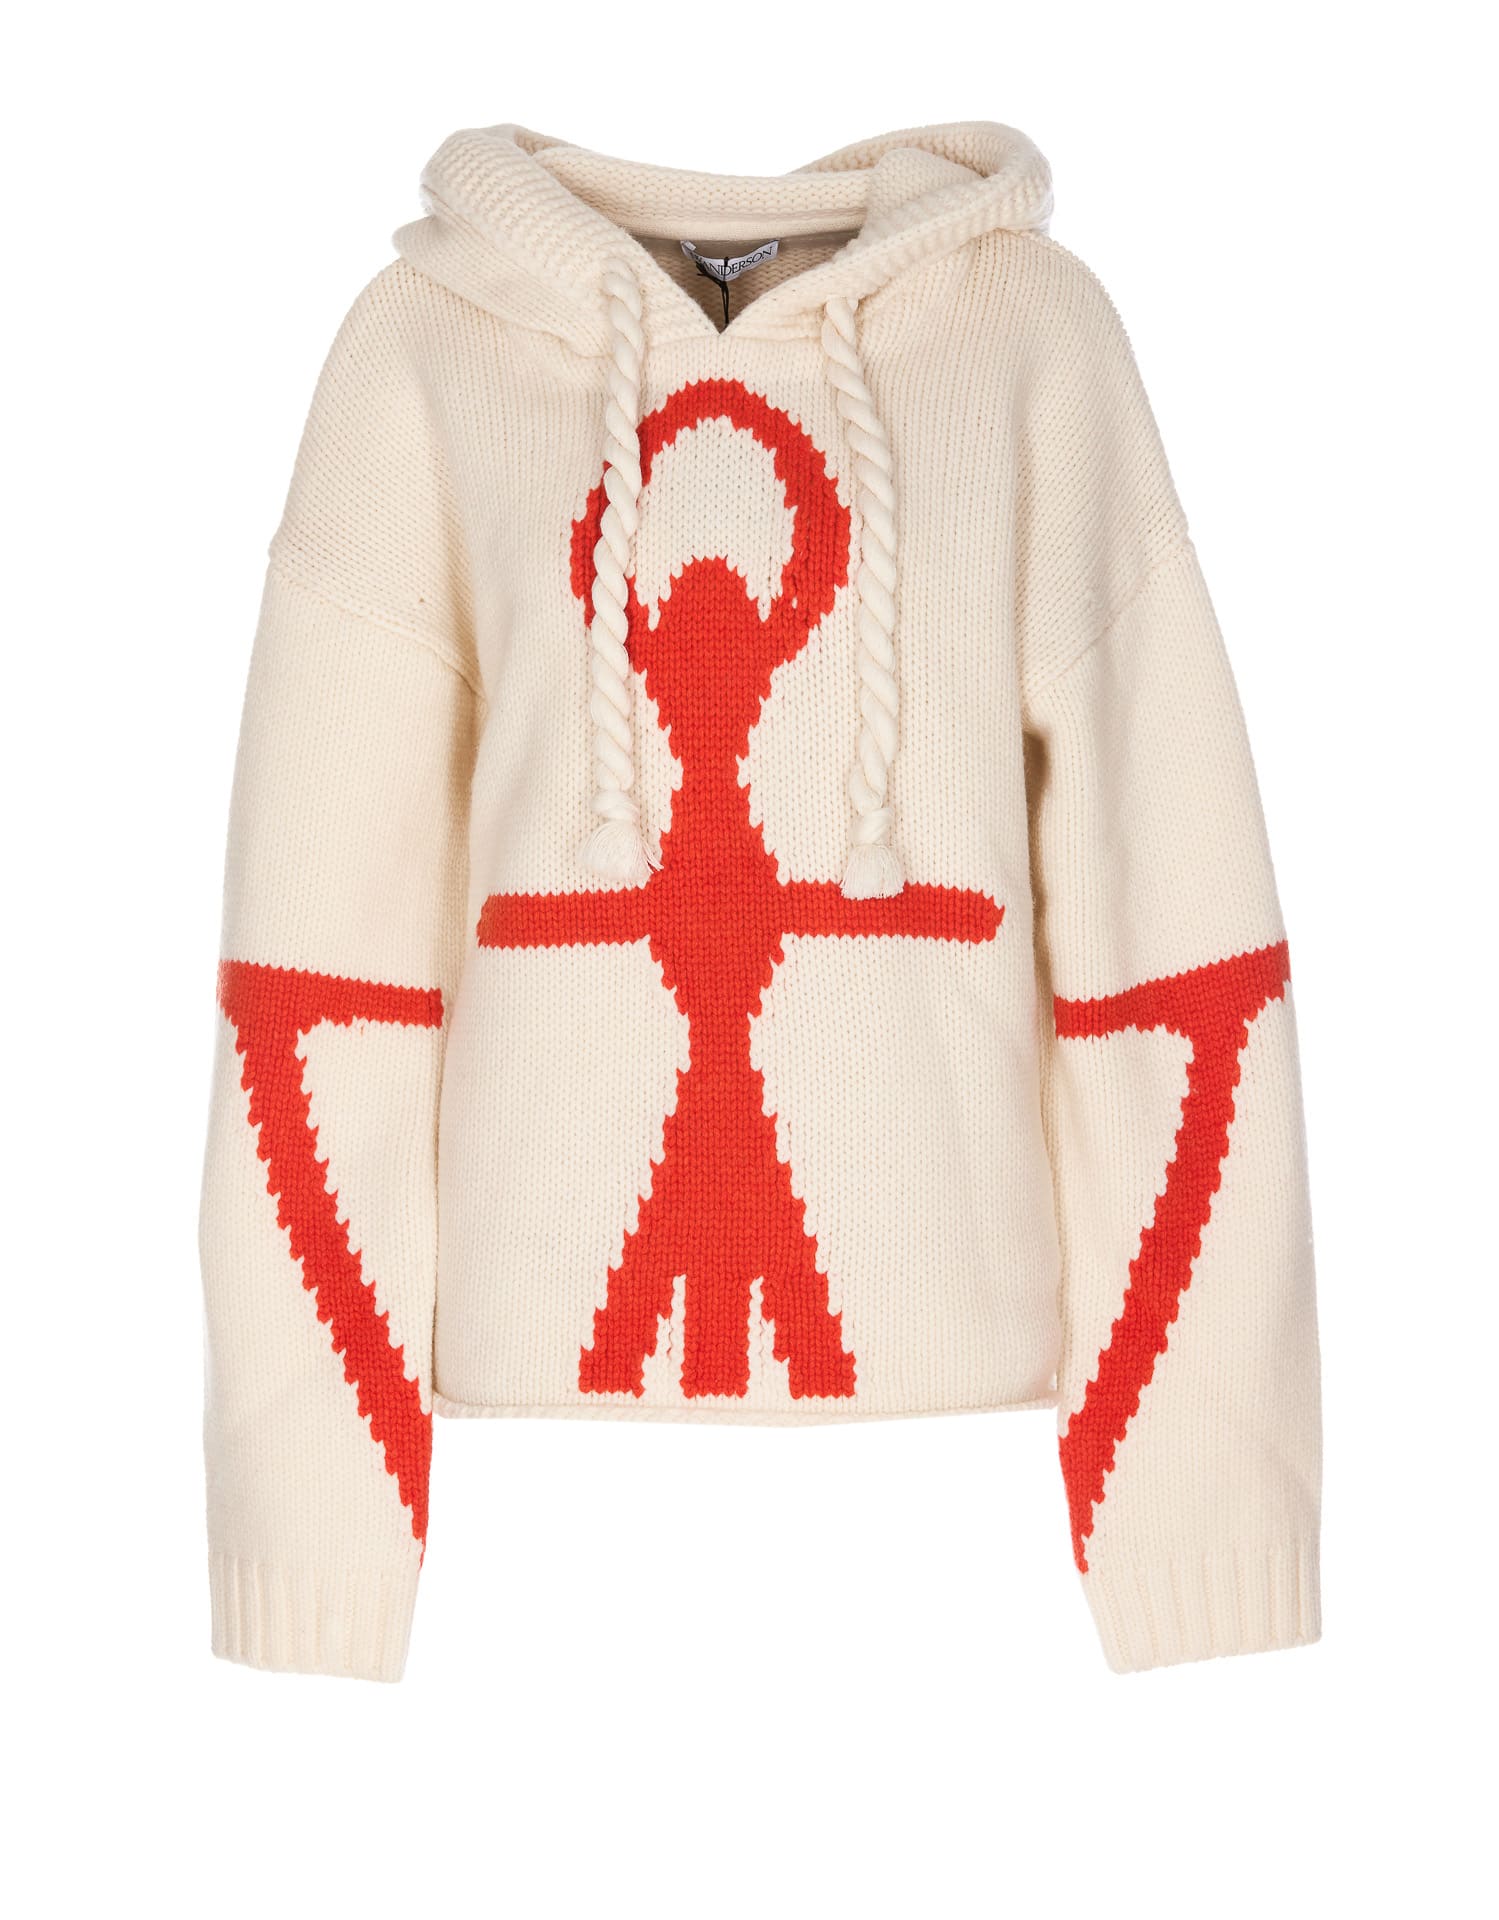 JW ANDERSON ANCHOR LOGO KNITTED HOODIE